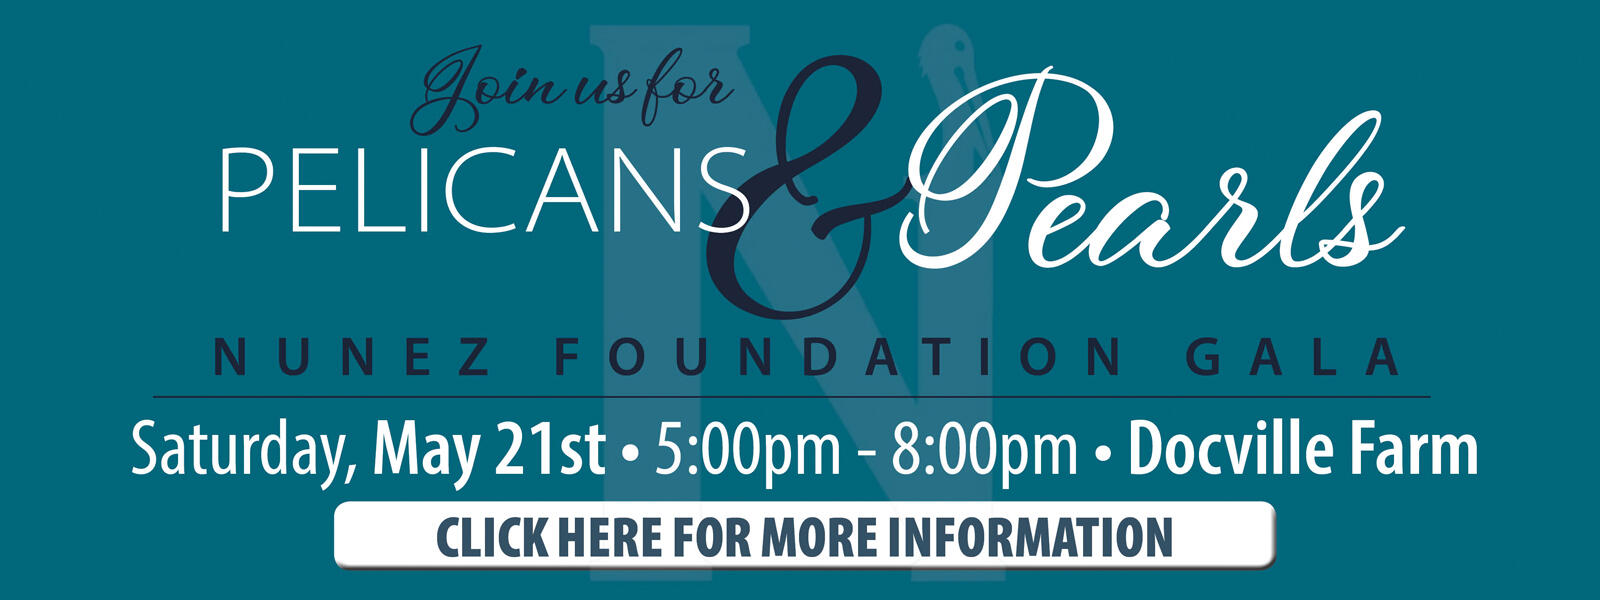 Pelicans and Pearls Annual Gala, May 21st - Click Here for More Information